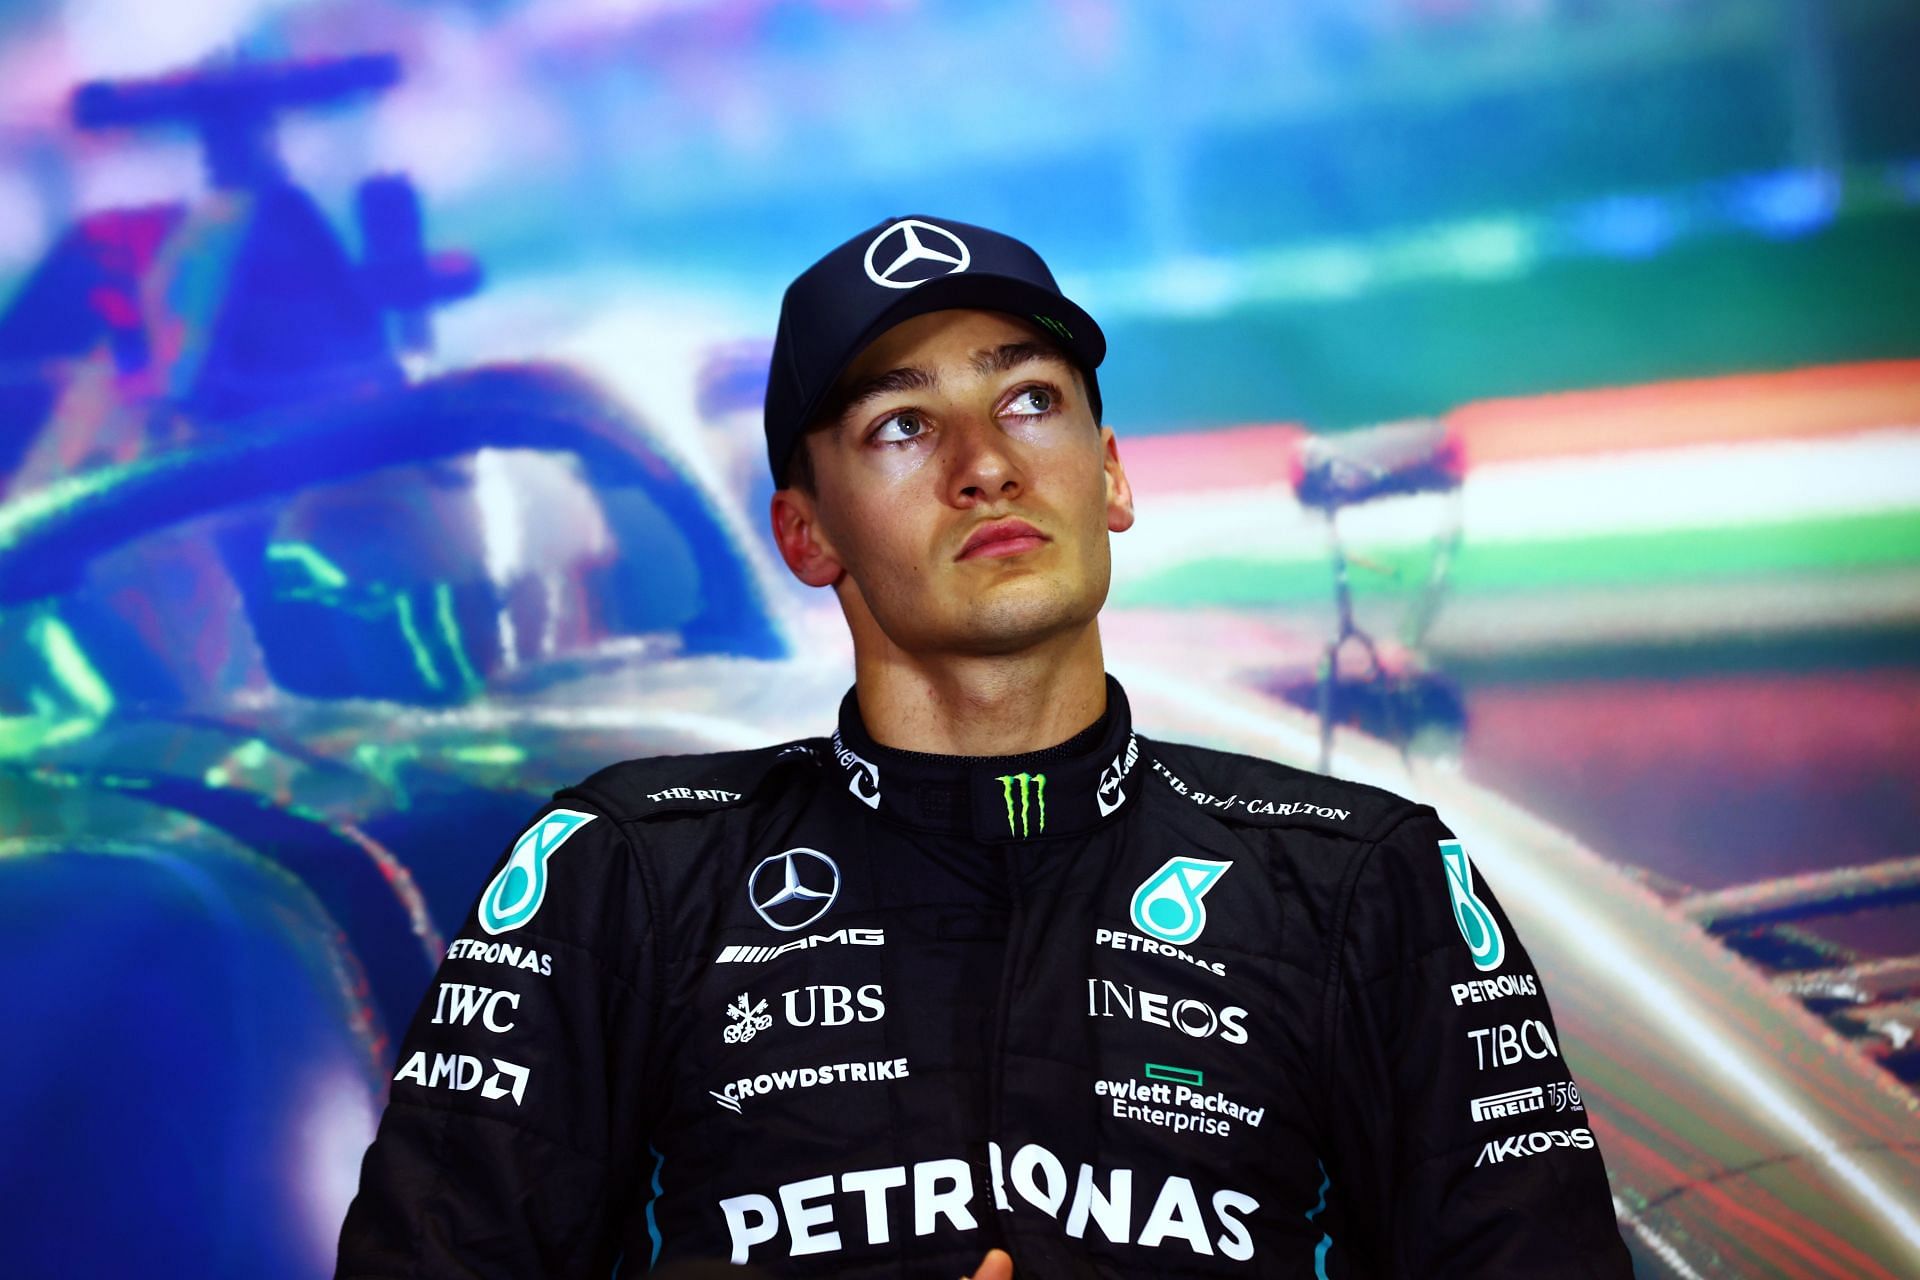 Mercedes driver George Russell speaks to the media after qualifying for the 2022 F1 Hungarian GP. (Photo by Dan Istitene/Getty Images)